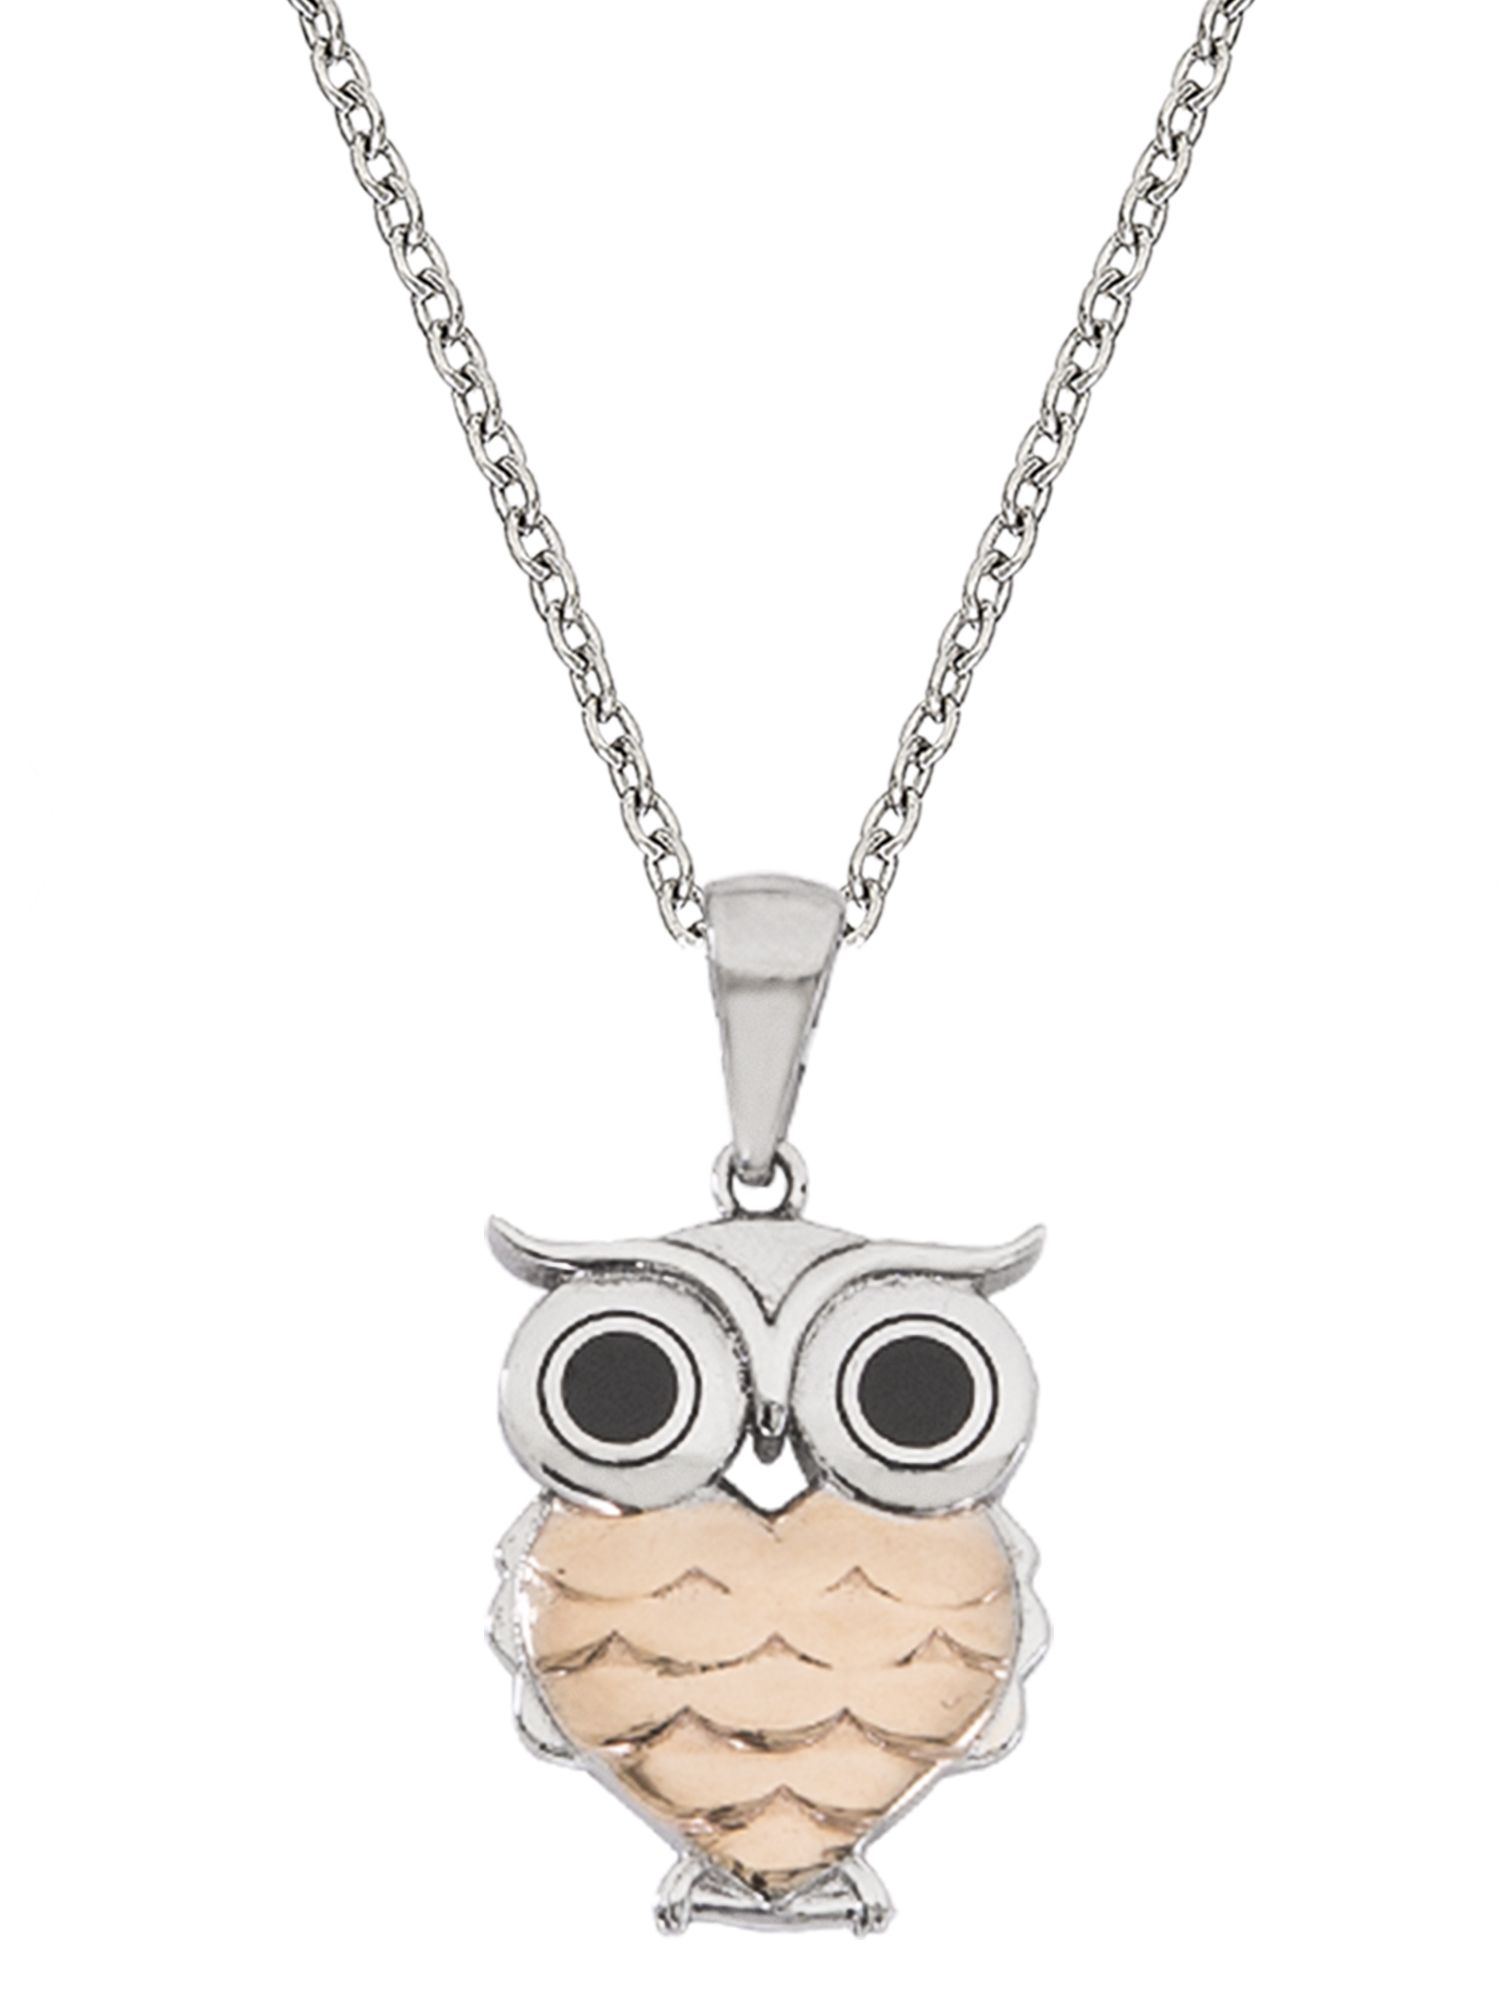 Cute Owl Pendant Necklace Animal Pendant Necklace Stainless Steel Chain Necklace